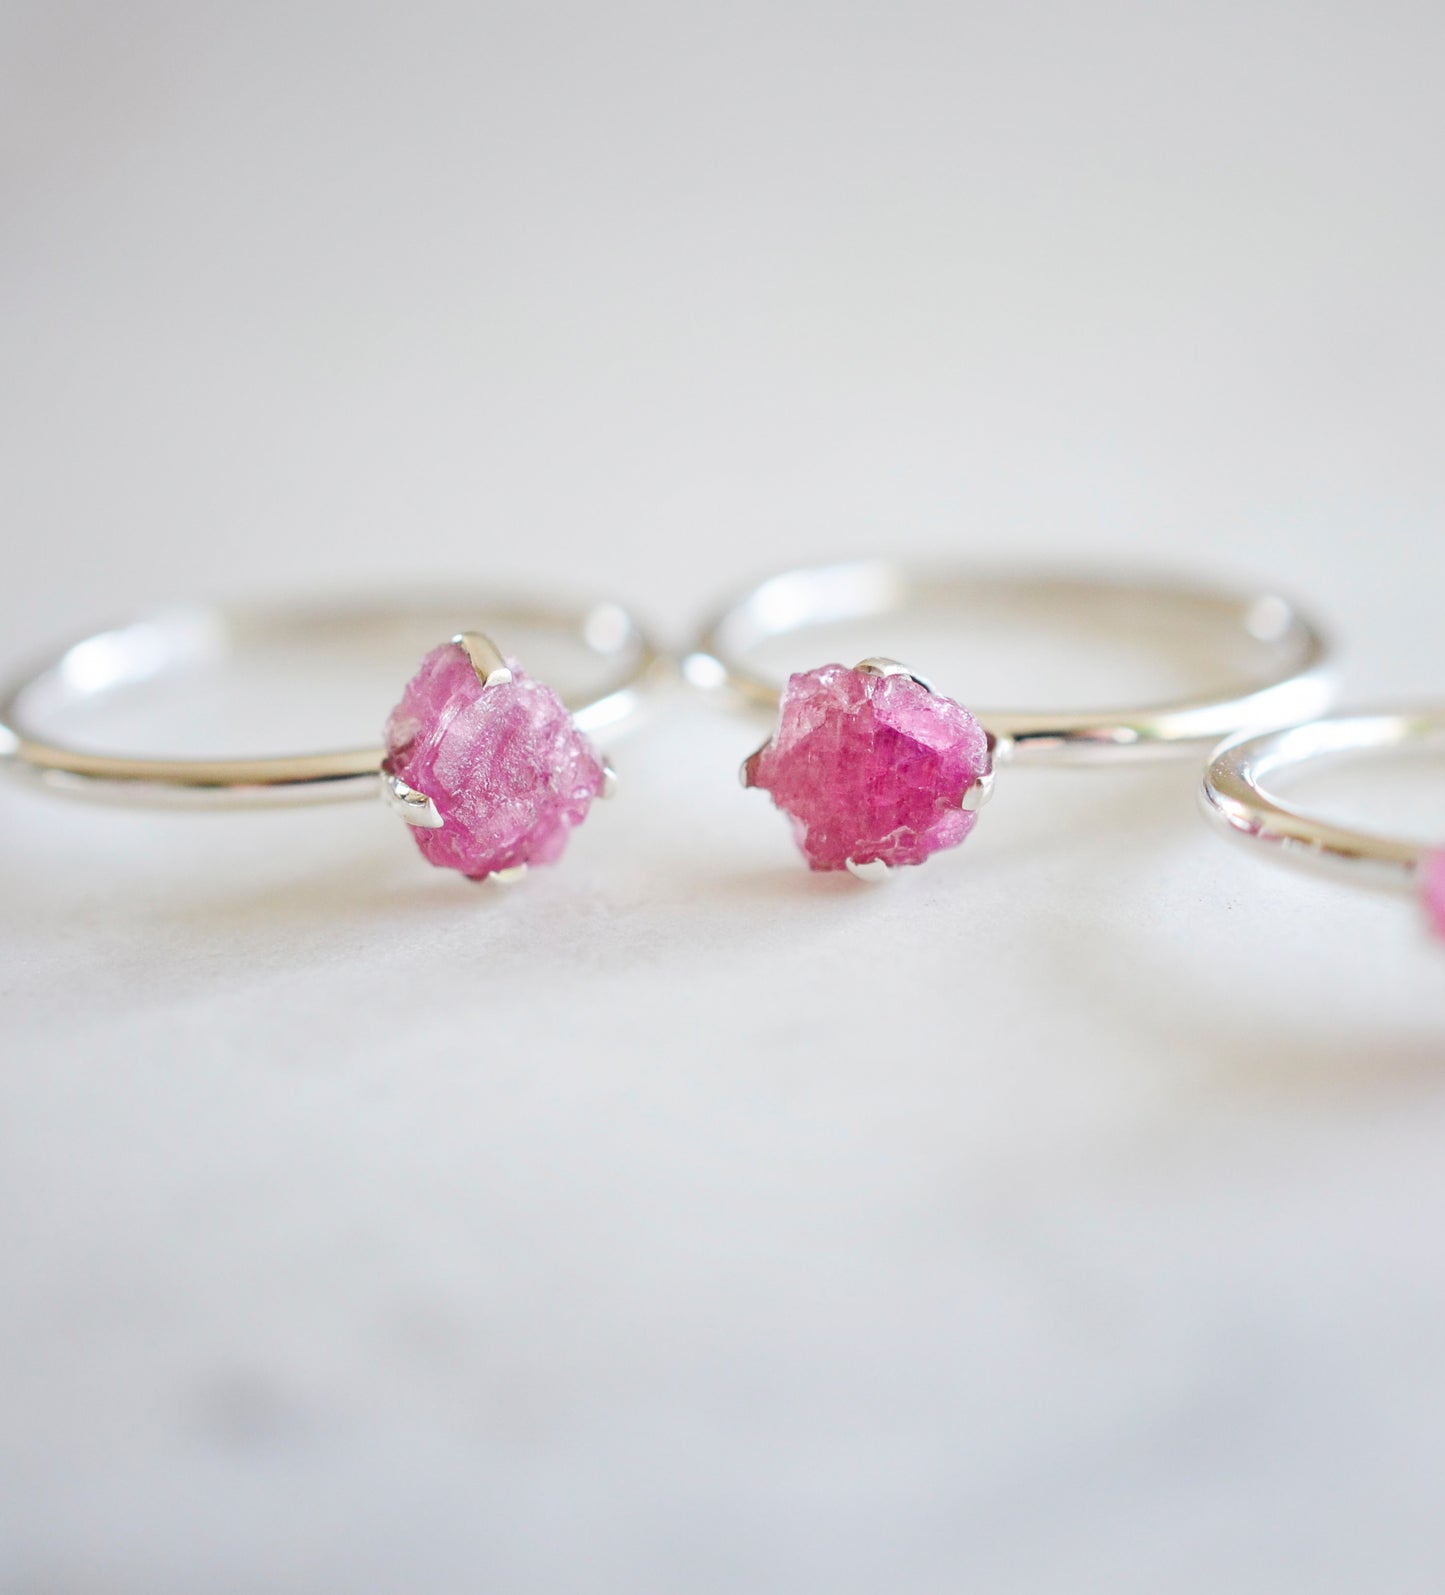 Raw Pink Tourmaline crystals set onto sterling silver rings. Showing two rings. 